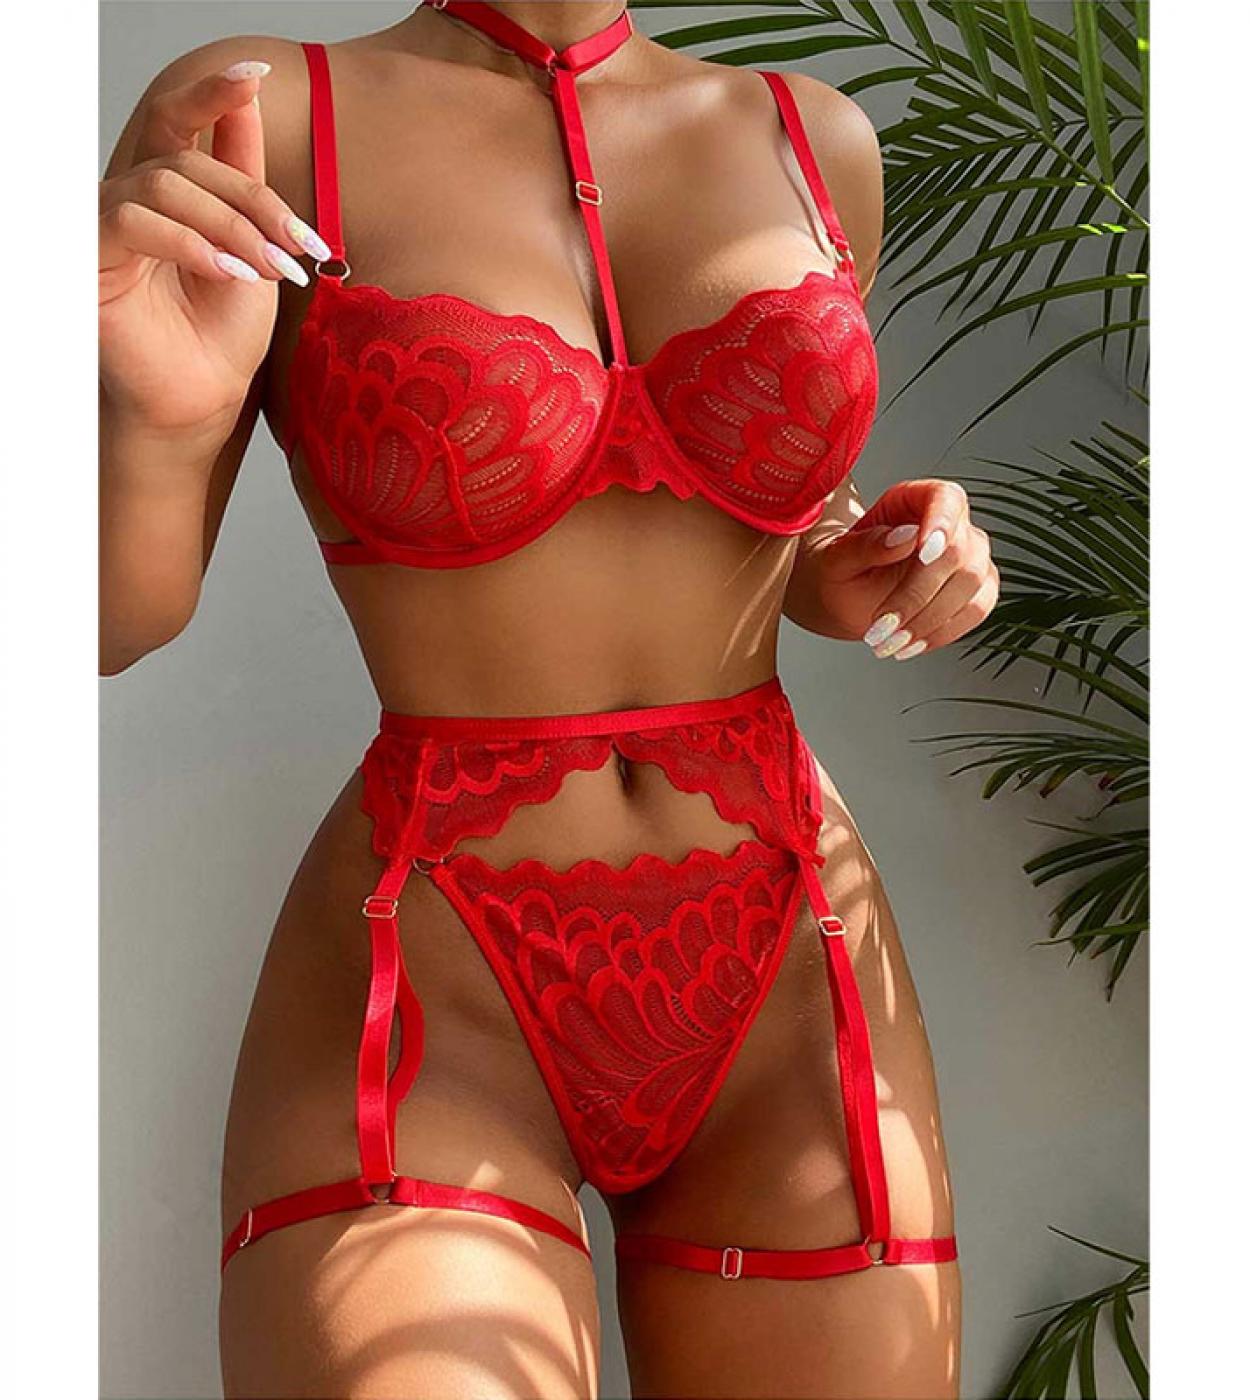 Sheer Lace Brapantiesgarters Net Babydoll O Costumes Women Hot Exotic Open  Bra Crotchless Lace Lingerie Set Babydoll